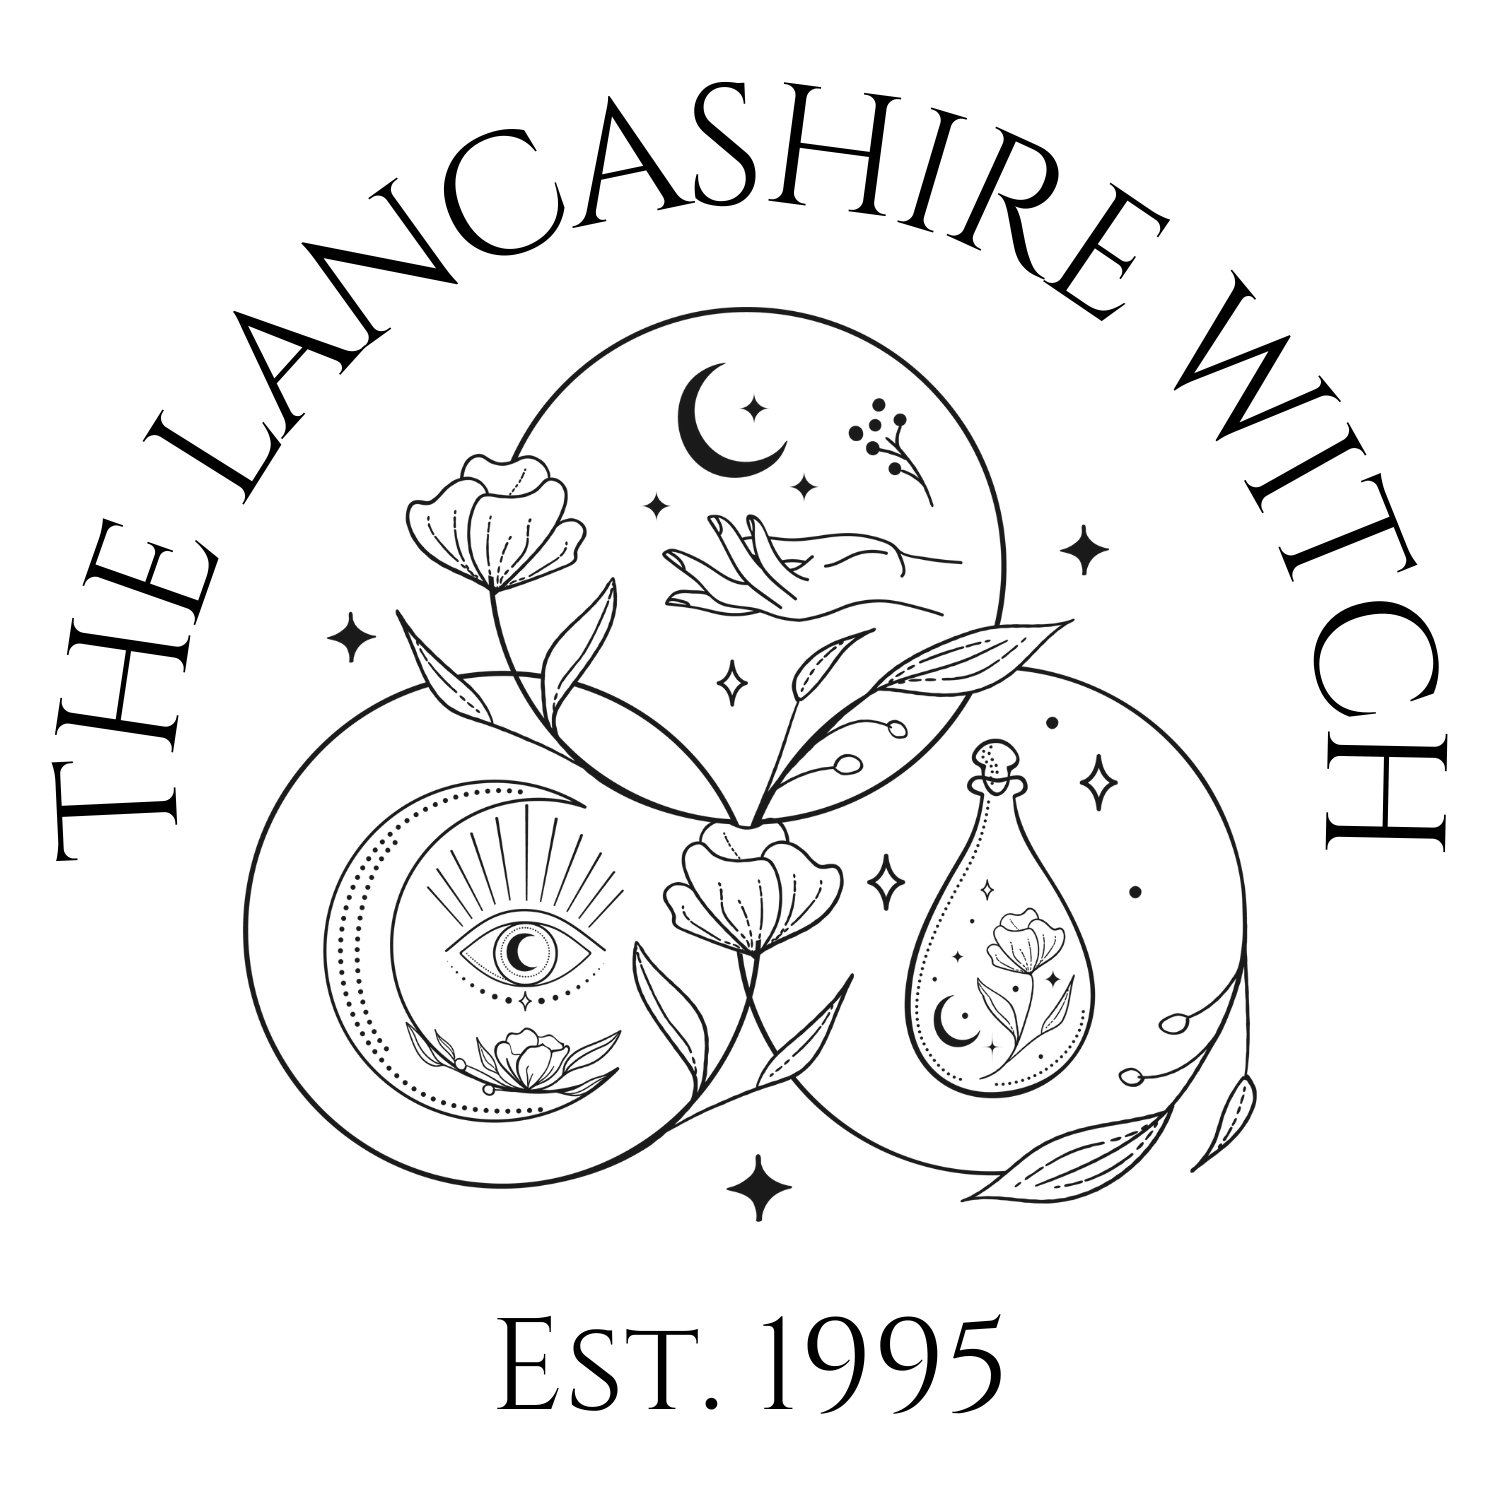 Lancashire web design, website development, WordPress support & business coaching UK. We are a Lancashire based UK wide web design, web development, WordPress support & training, business coaching & virtual assistant company that support businesses from small businesses and side hustles to large worldwide brands.